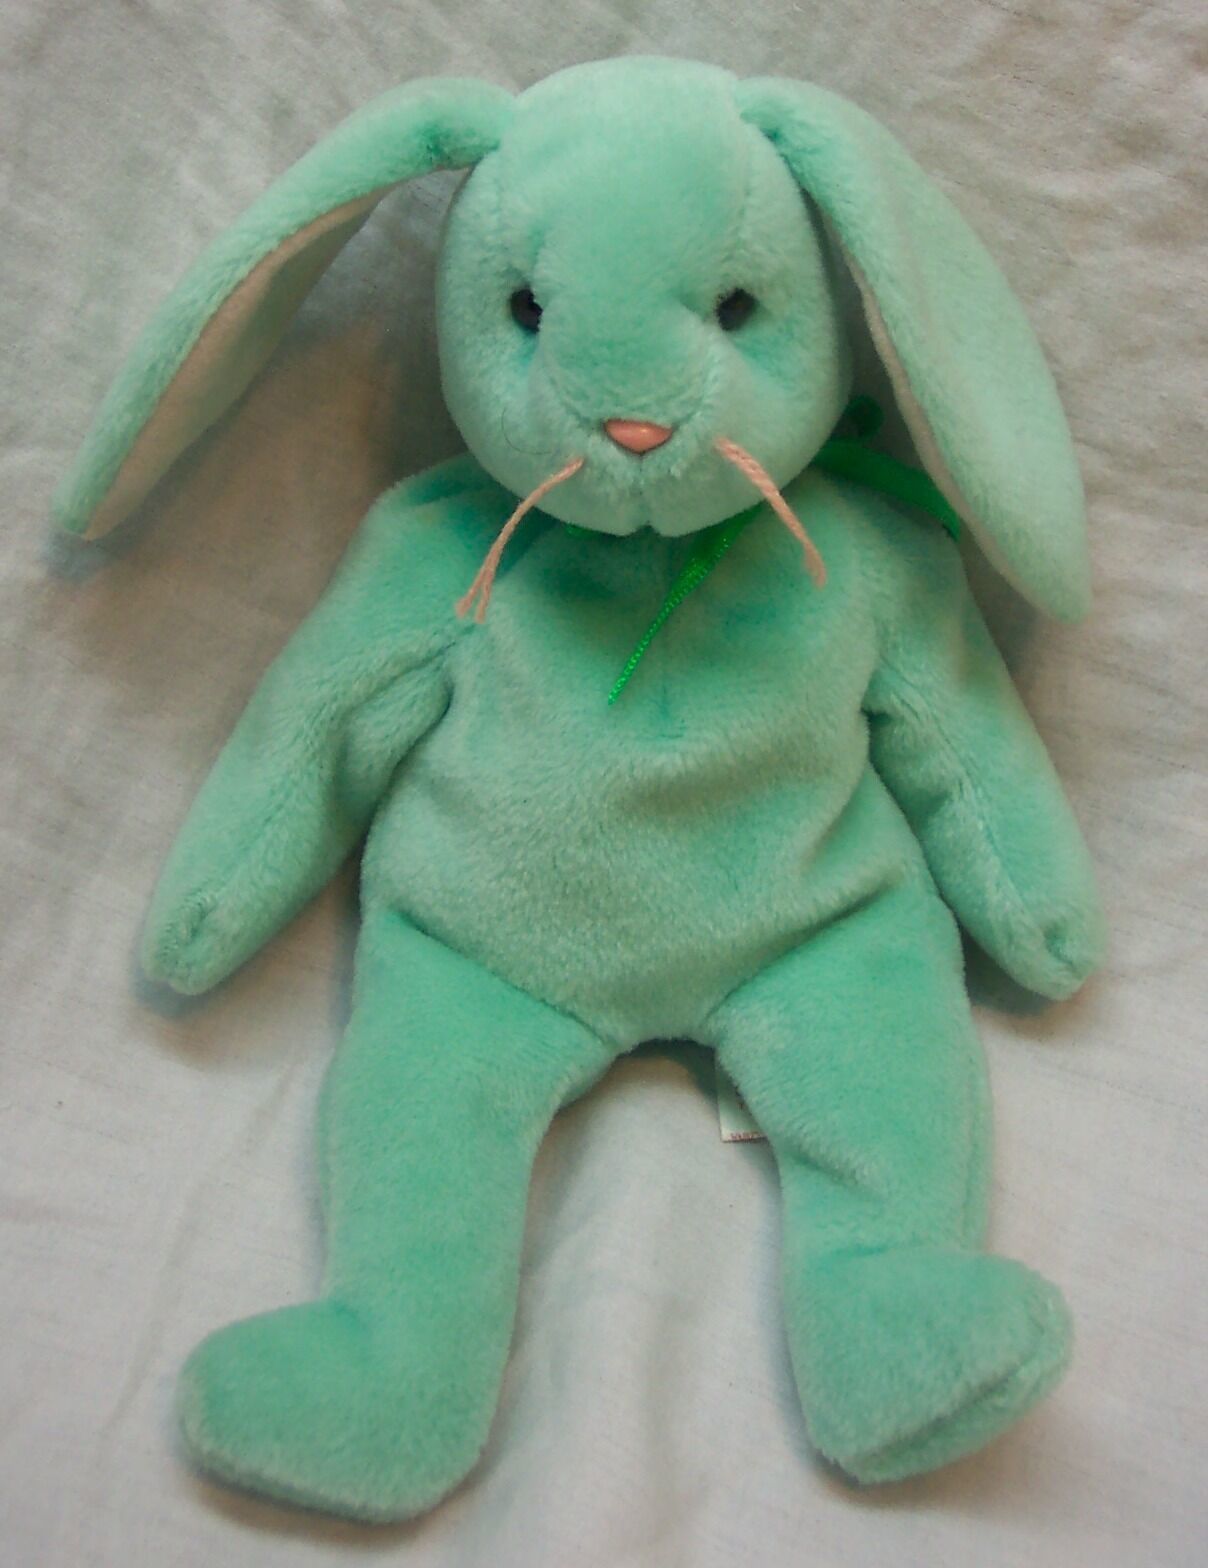 Primary image for TY Beanie Babies HIPPITY GREEN BUNNY RABBIT 8" Bean Bag Stuffed Animal Toy 1996